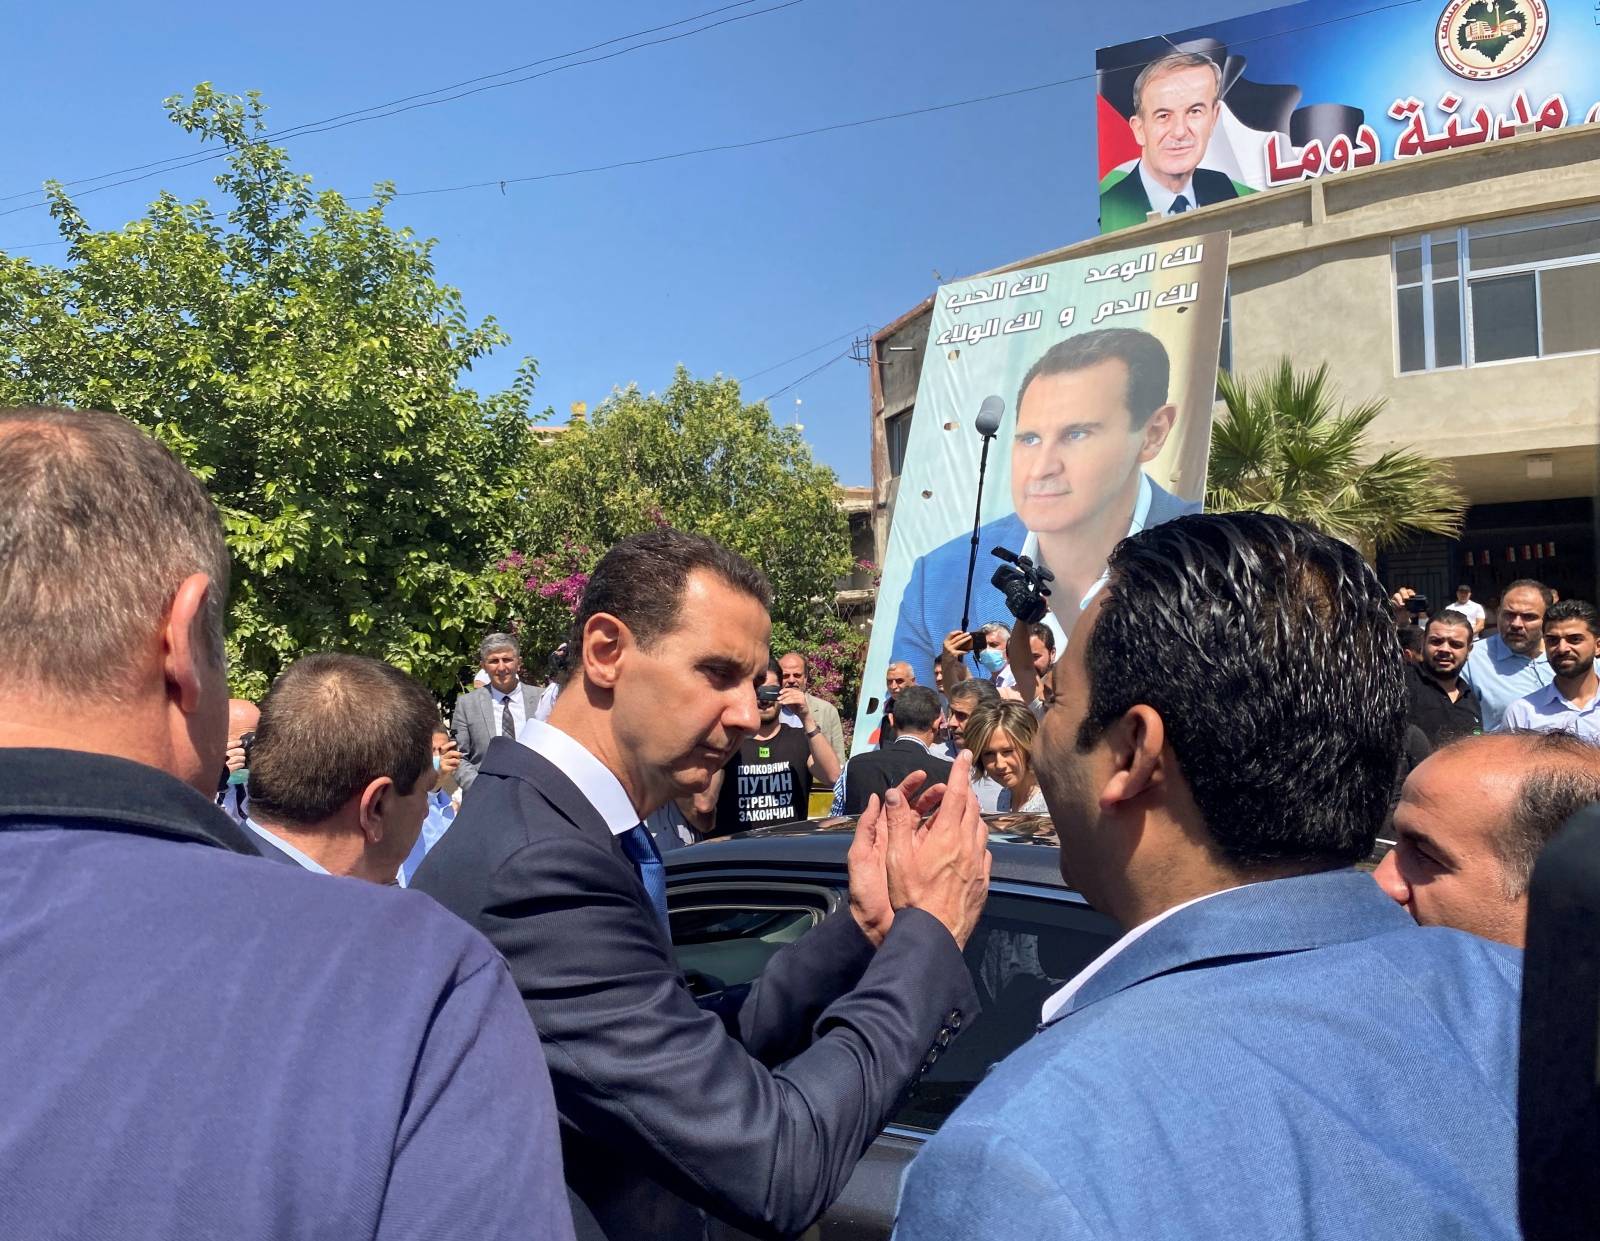 Syria's President Bashar al-Assad gestures as he leaves a polling station after casting his vote, during the country's presidential elections in Douma